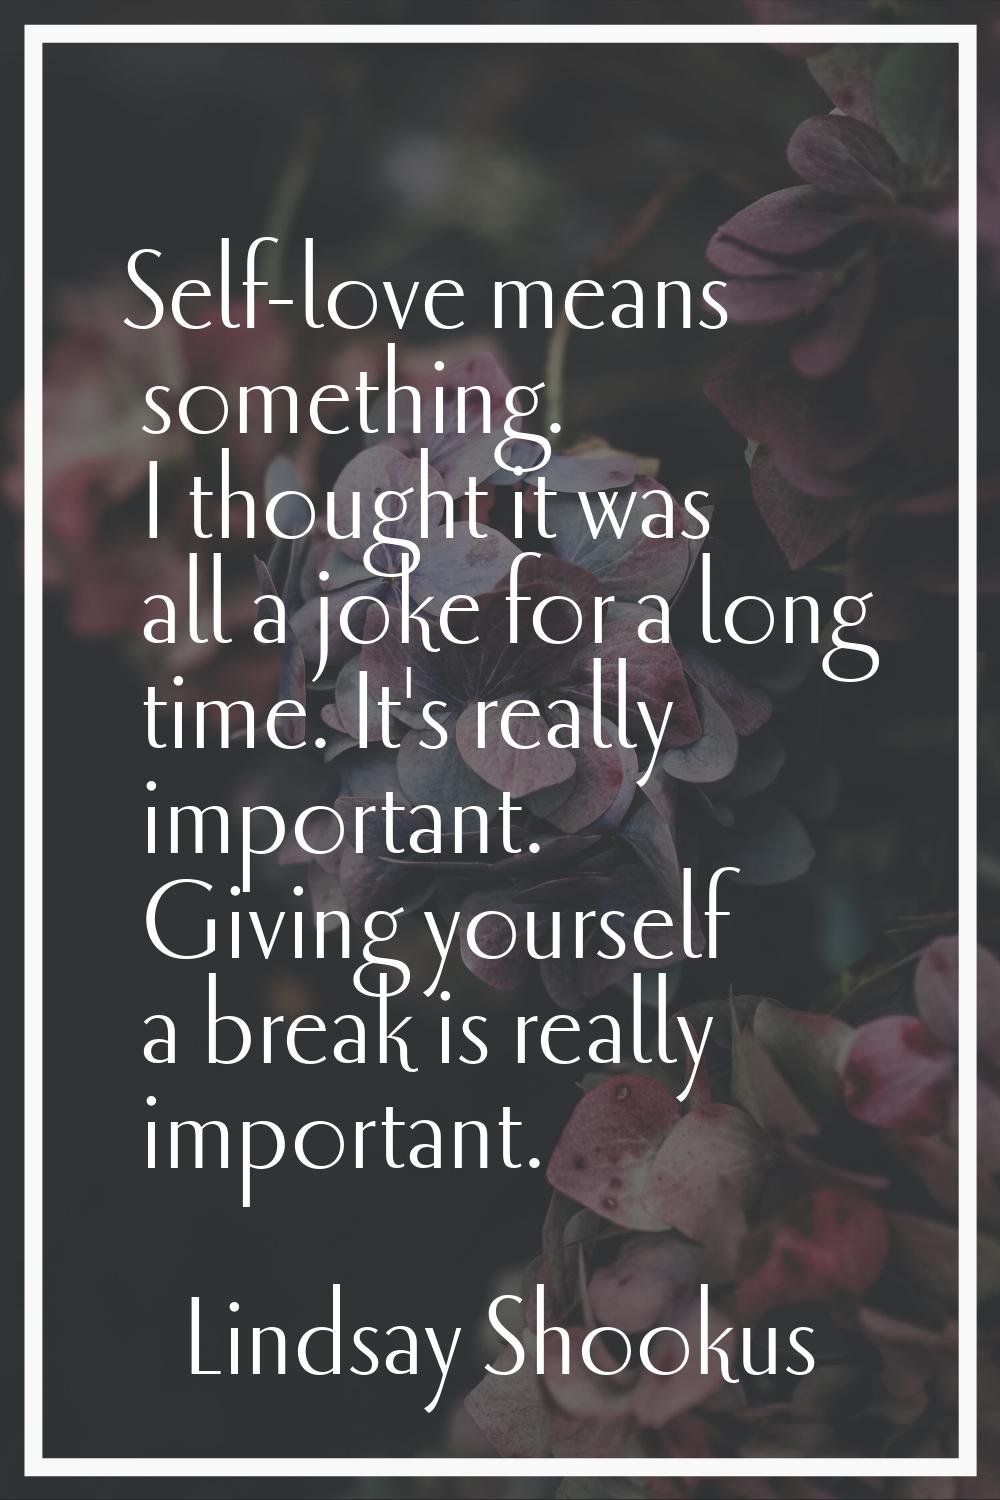 Self-love means something. I thought it was all a joke for a long time. It's really important. Givi